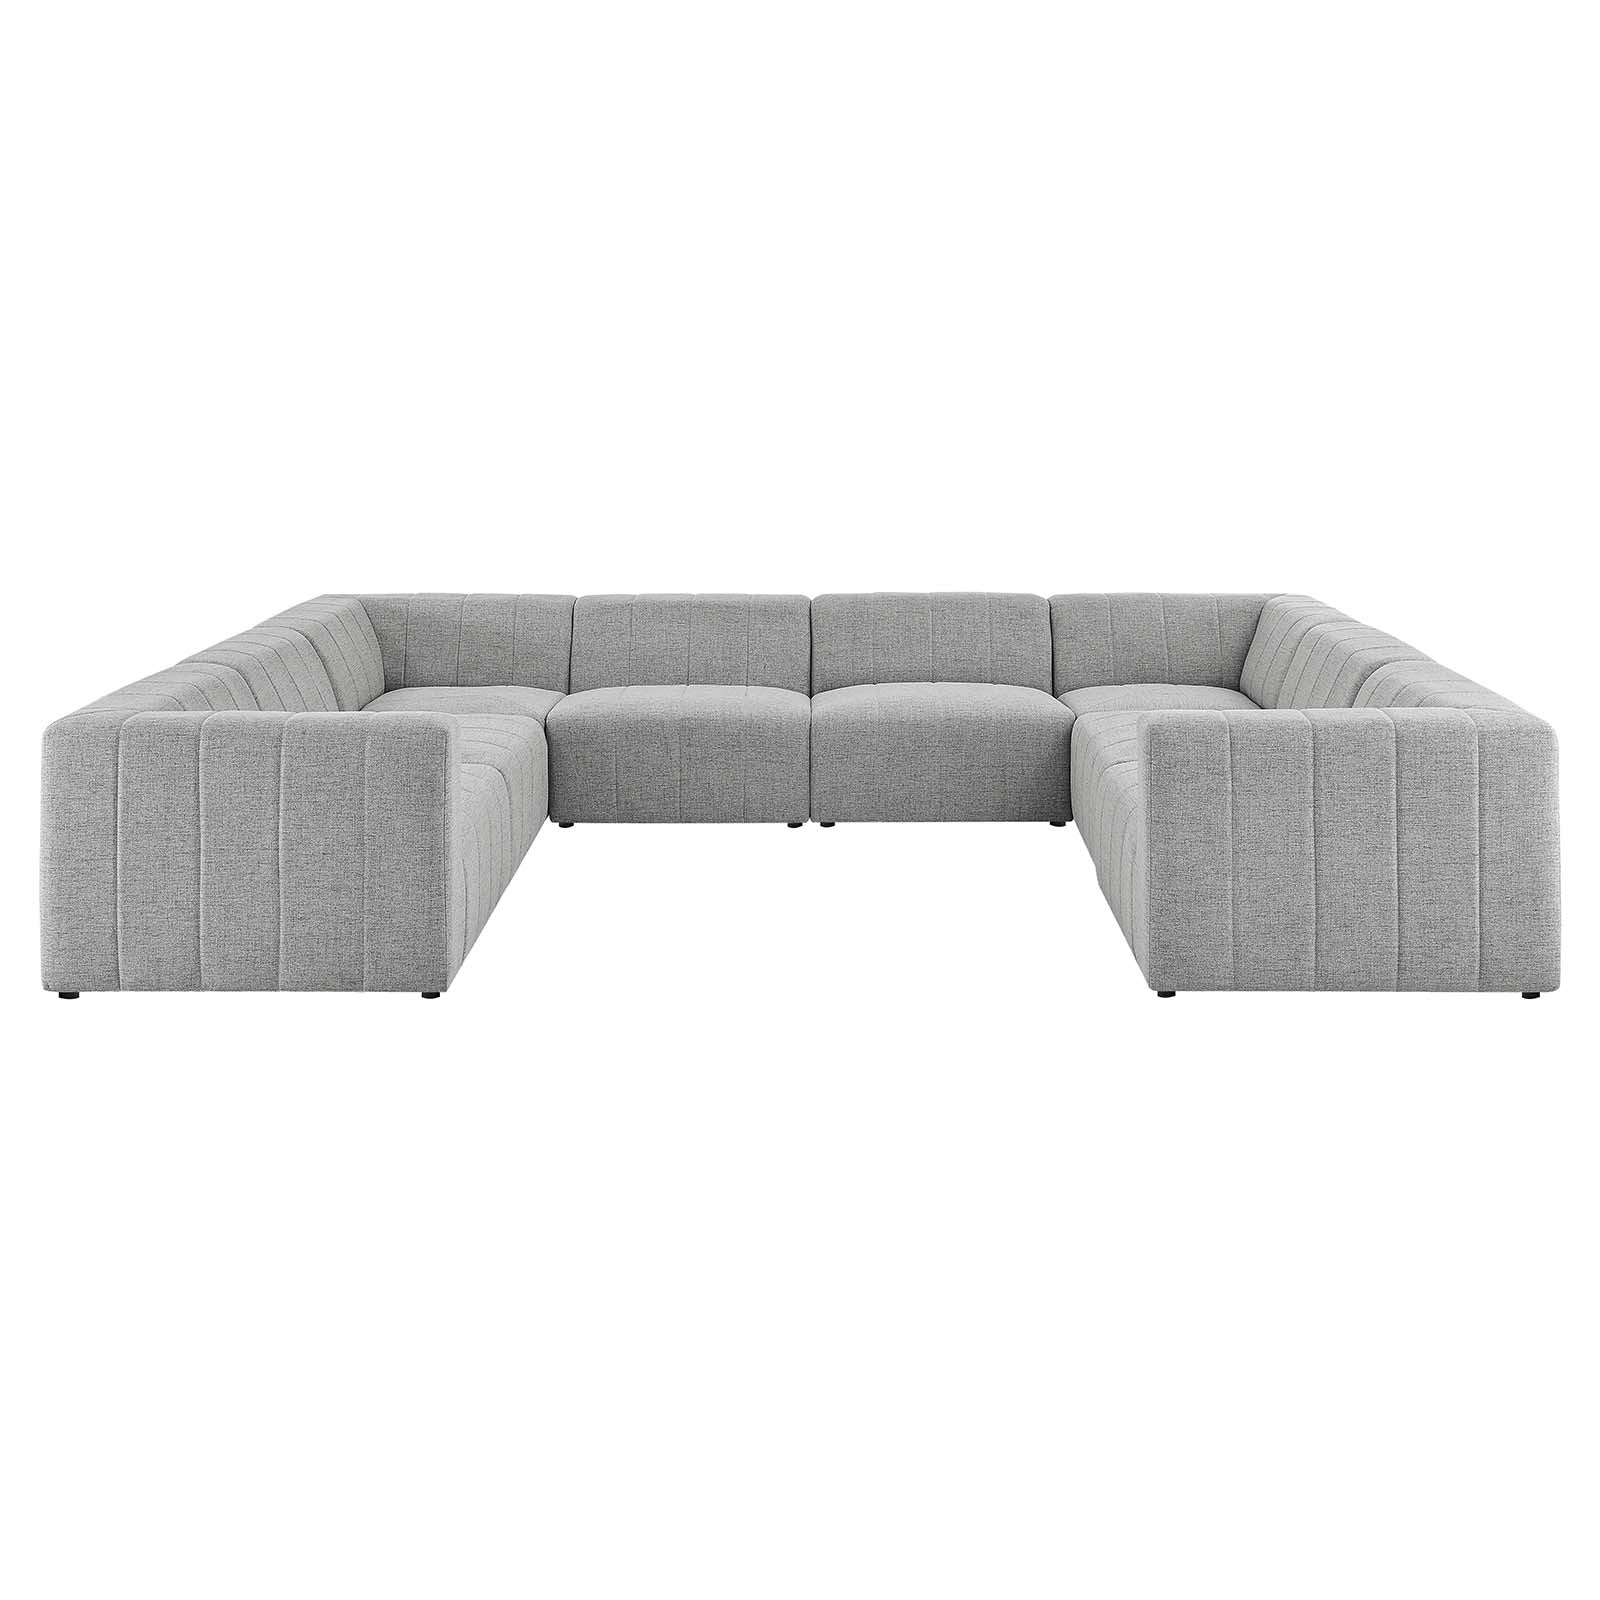 Modway Sectional Sofas - Bartlett Upholstered Fabric 8-Piece Sectional Sofa Light Gray